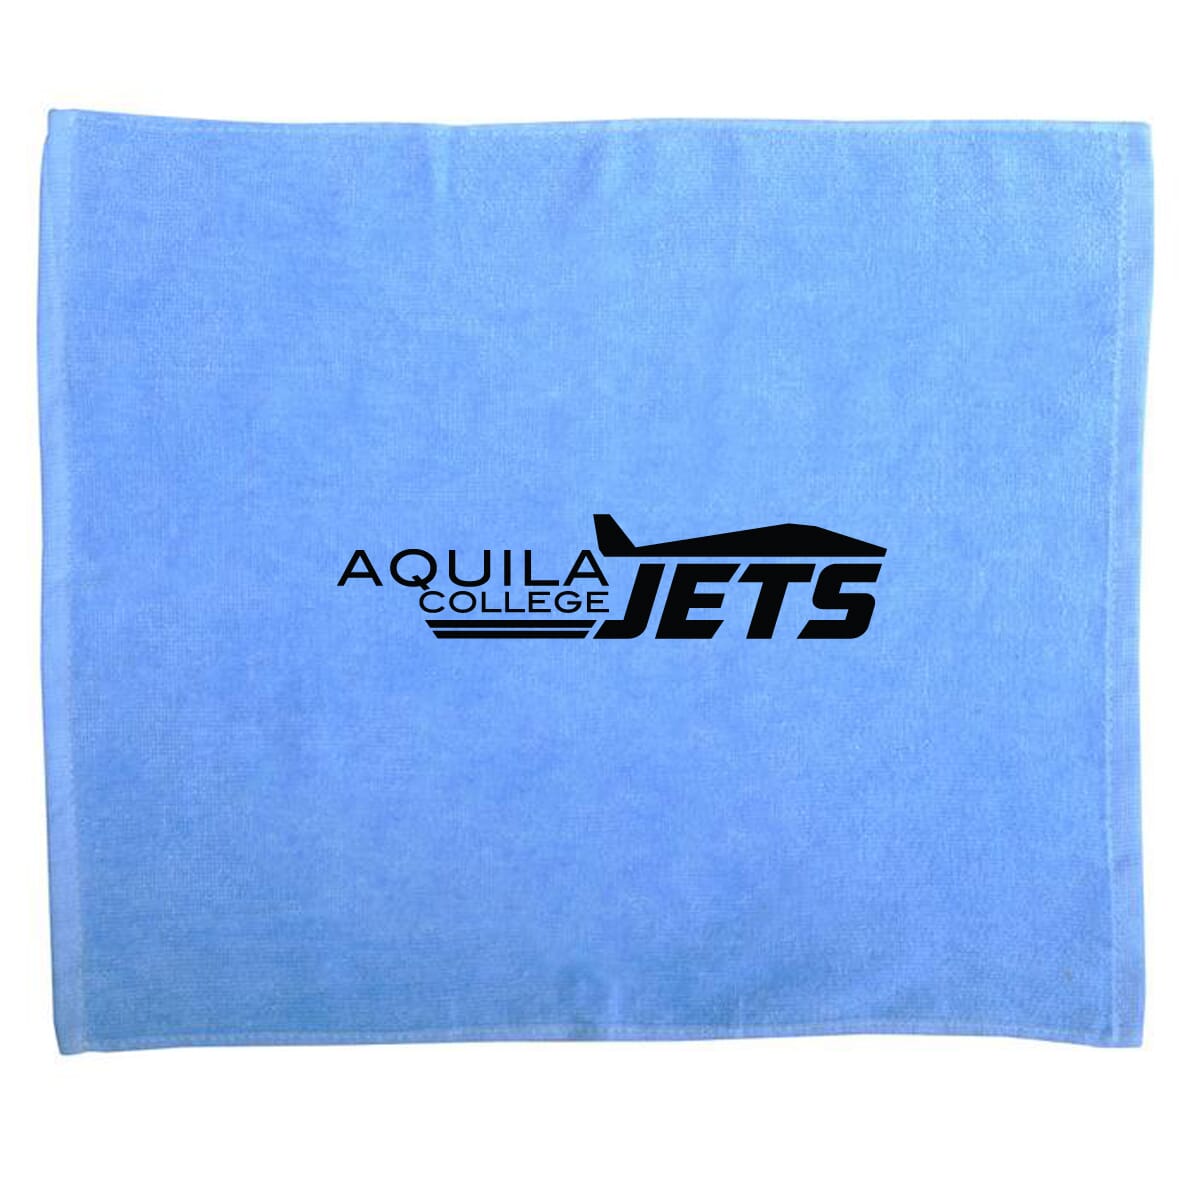 soft athletic towel with logo